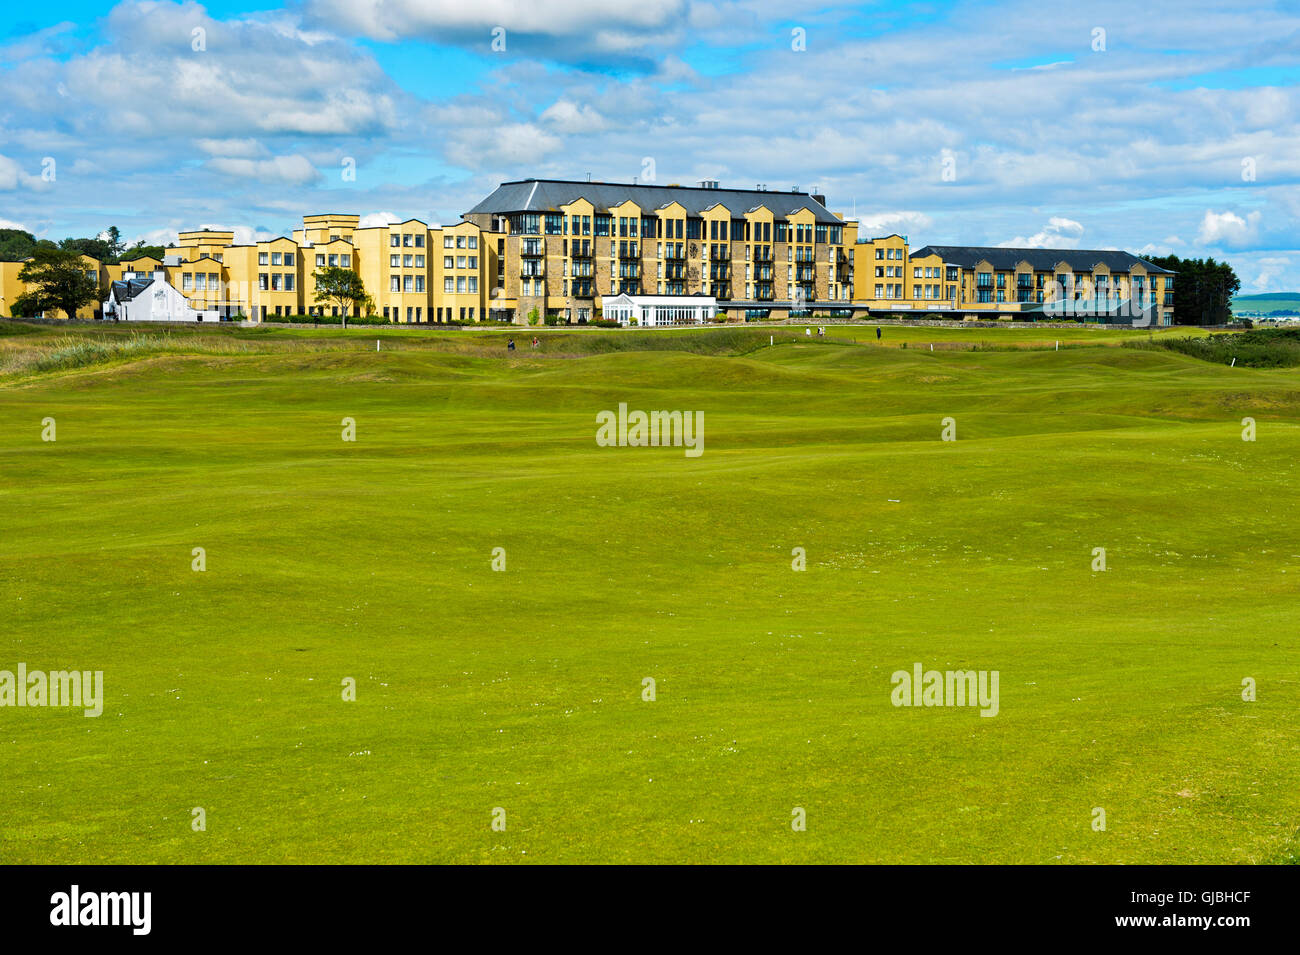 Old Course Hotel behind the Old Course, Golf course St Andrews Links, St Andrews, Fife, Scotland, Great Britain Stock Photo